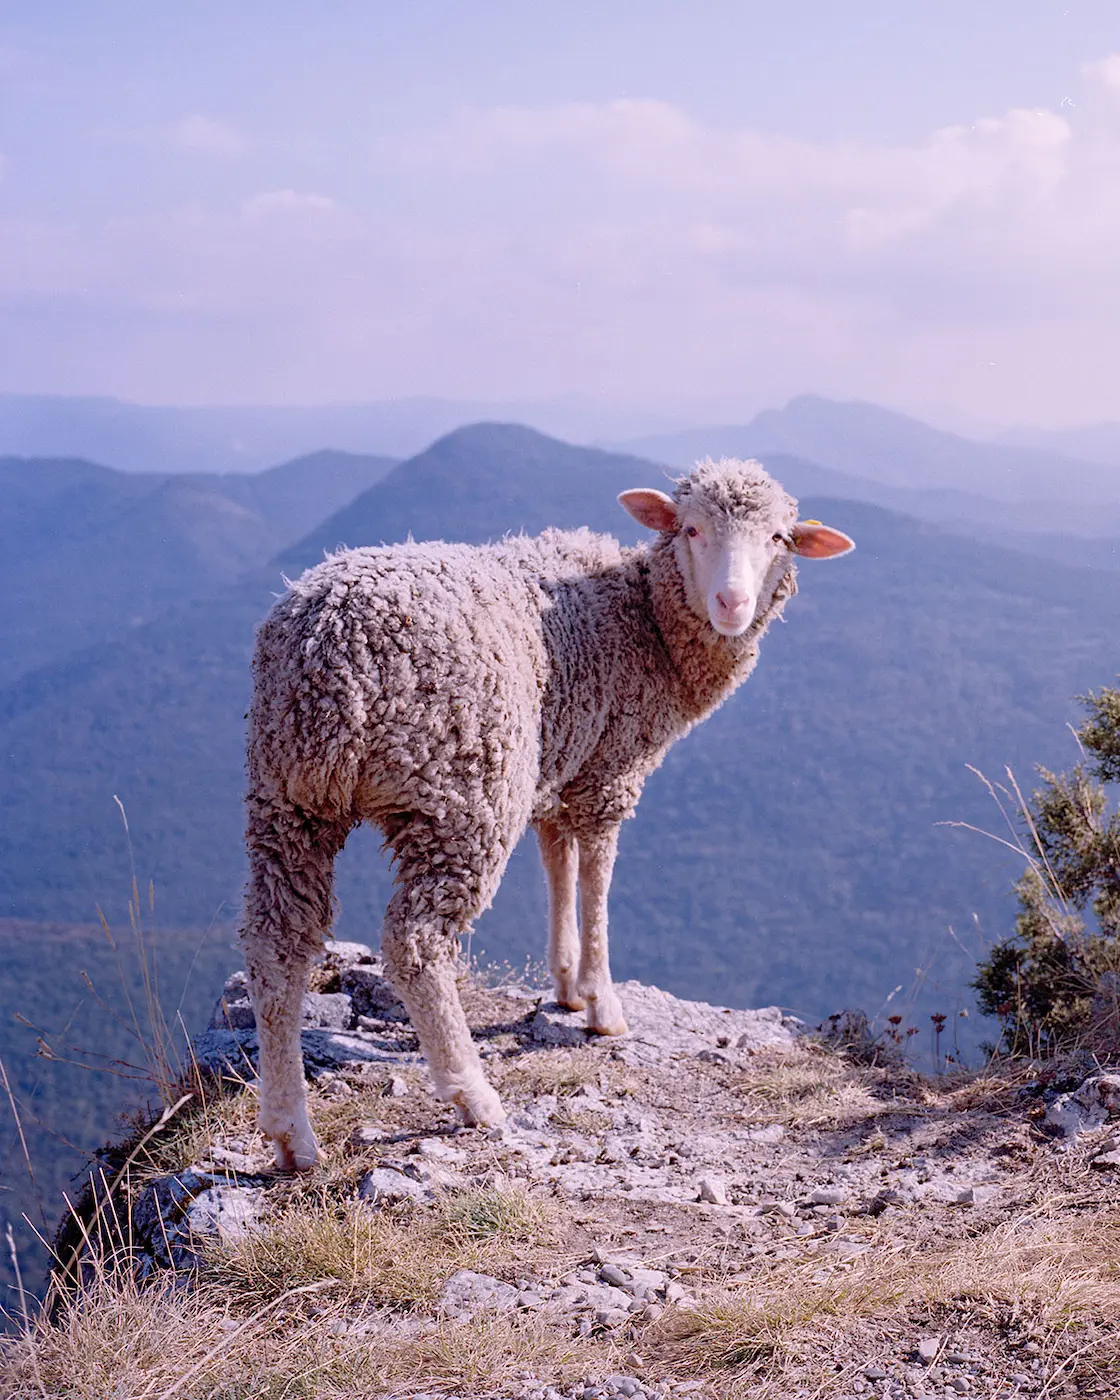 Portrait of a sheepm standing on top of a mountain.